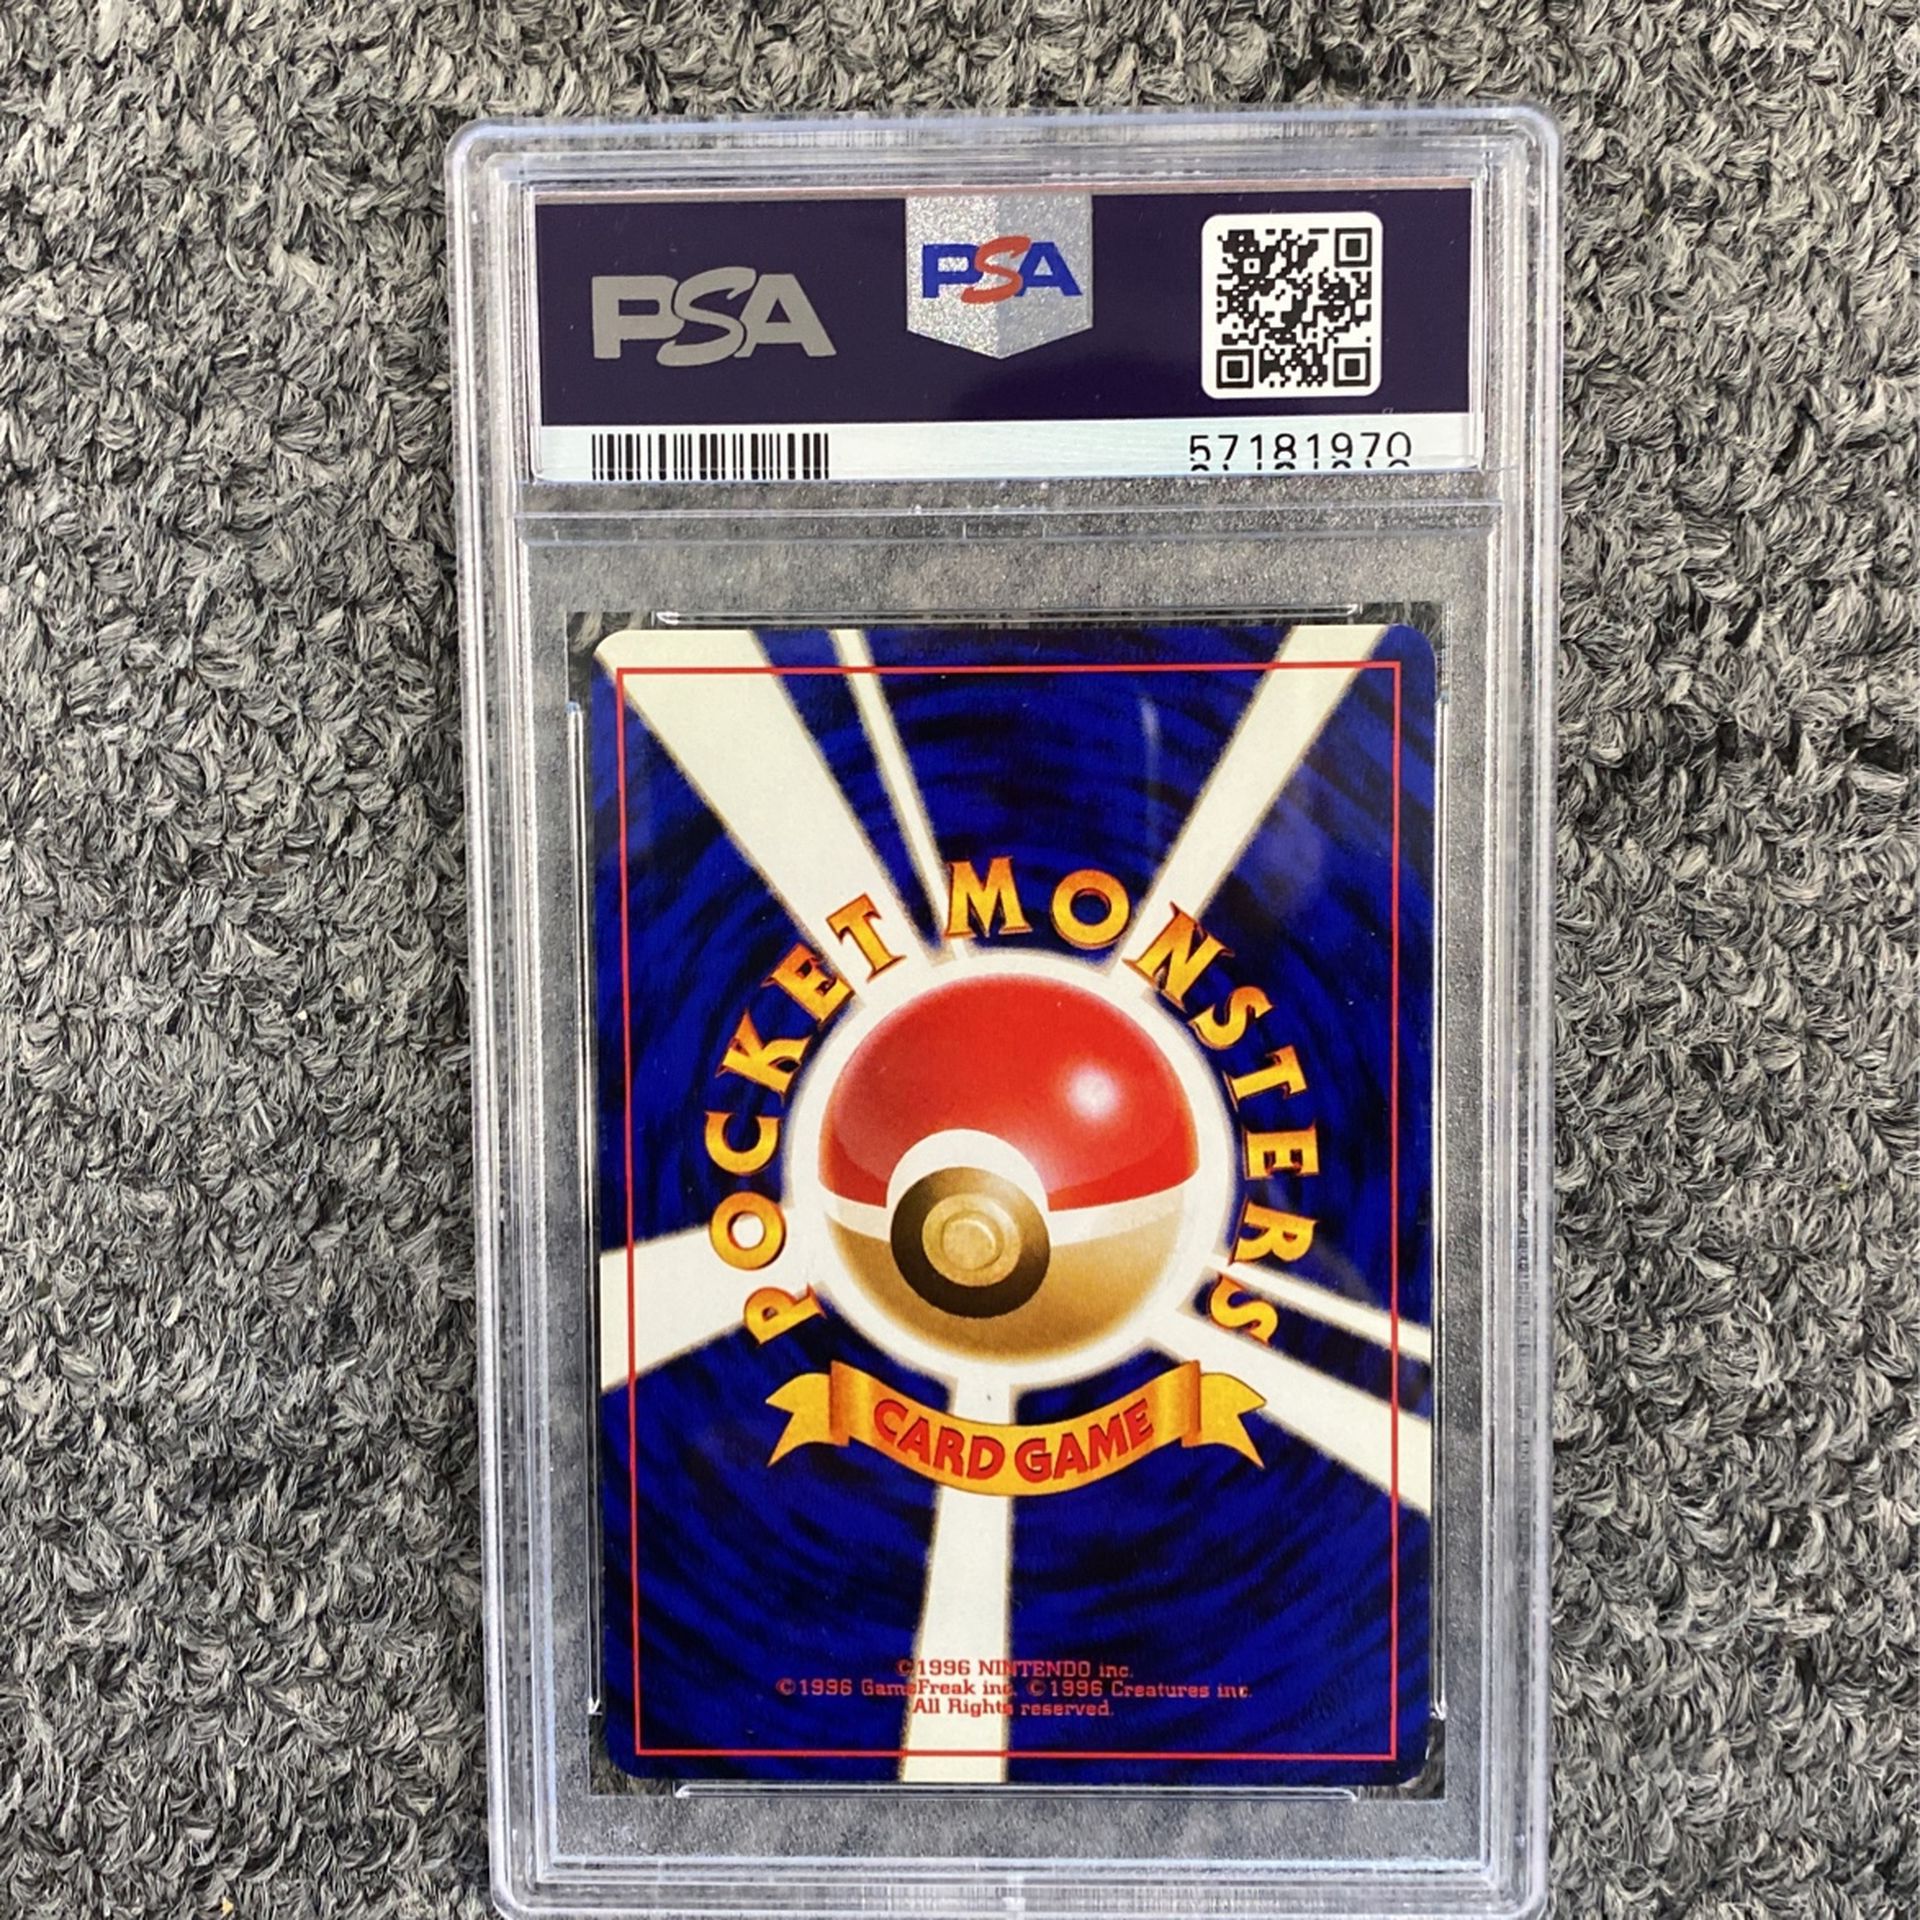 Japanese Moltres 1997 Psa 9 Fossil Graded 